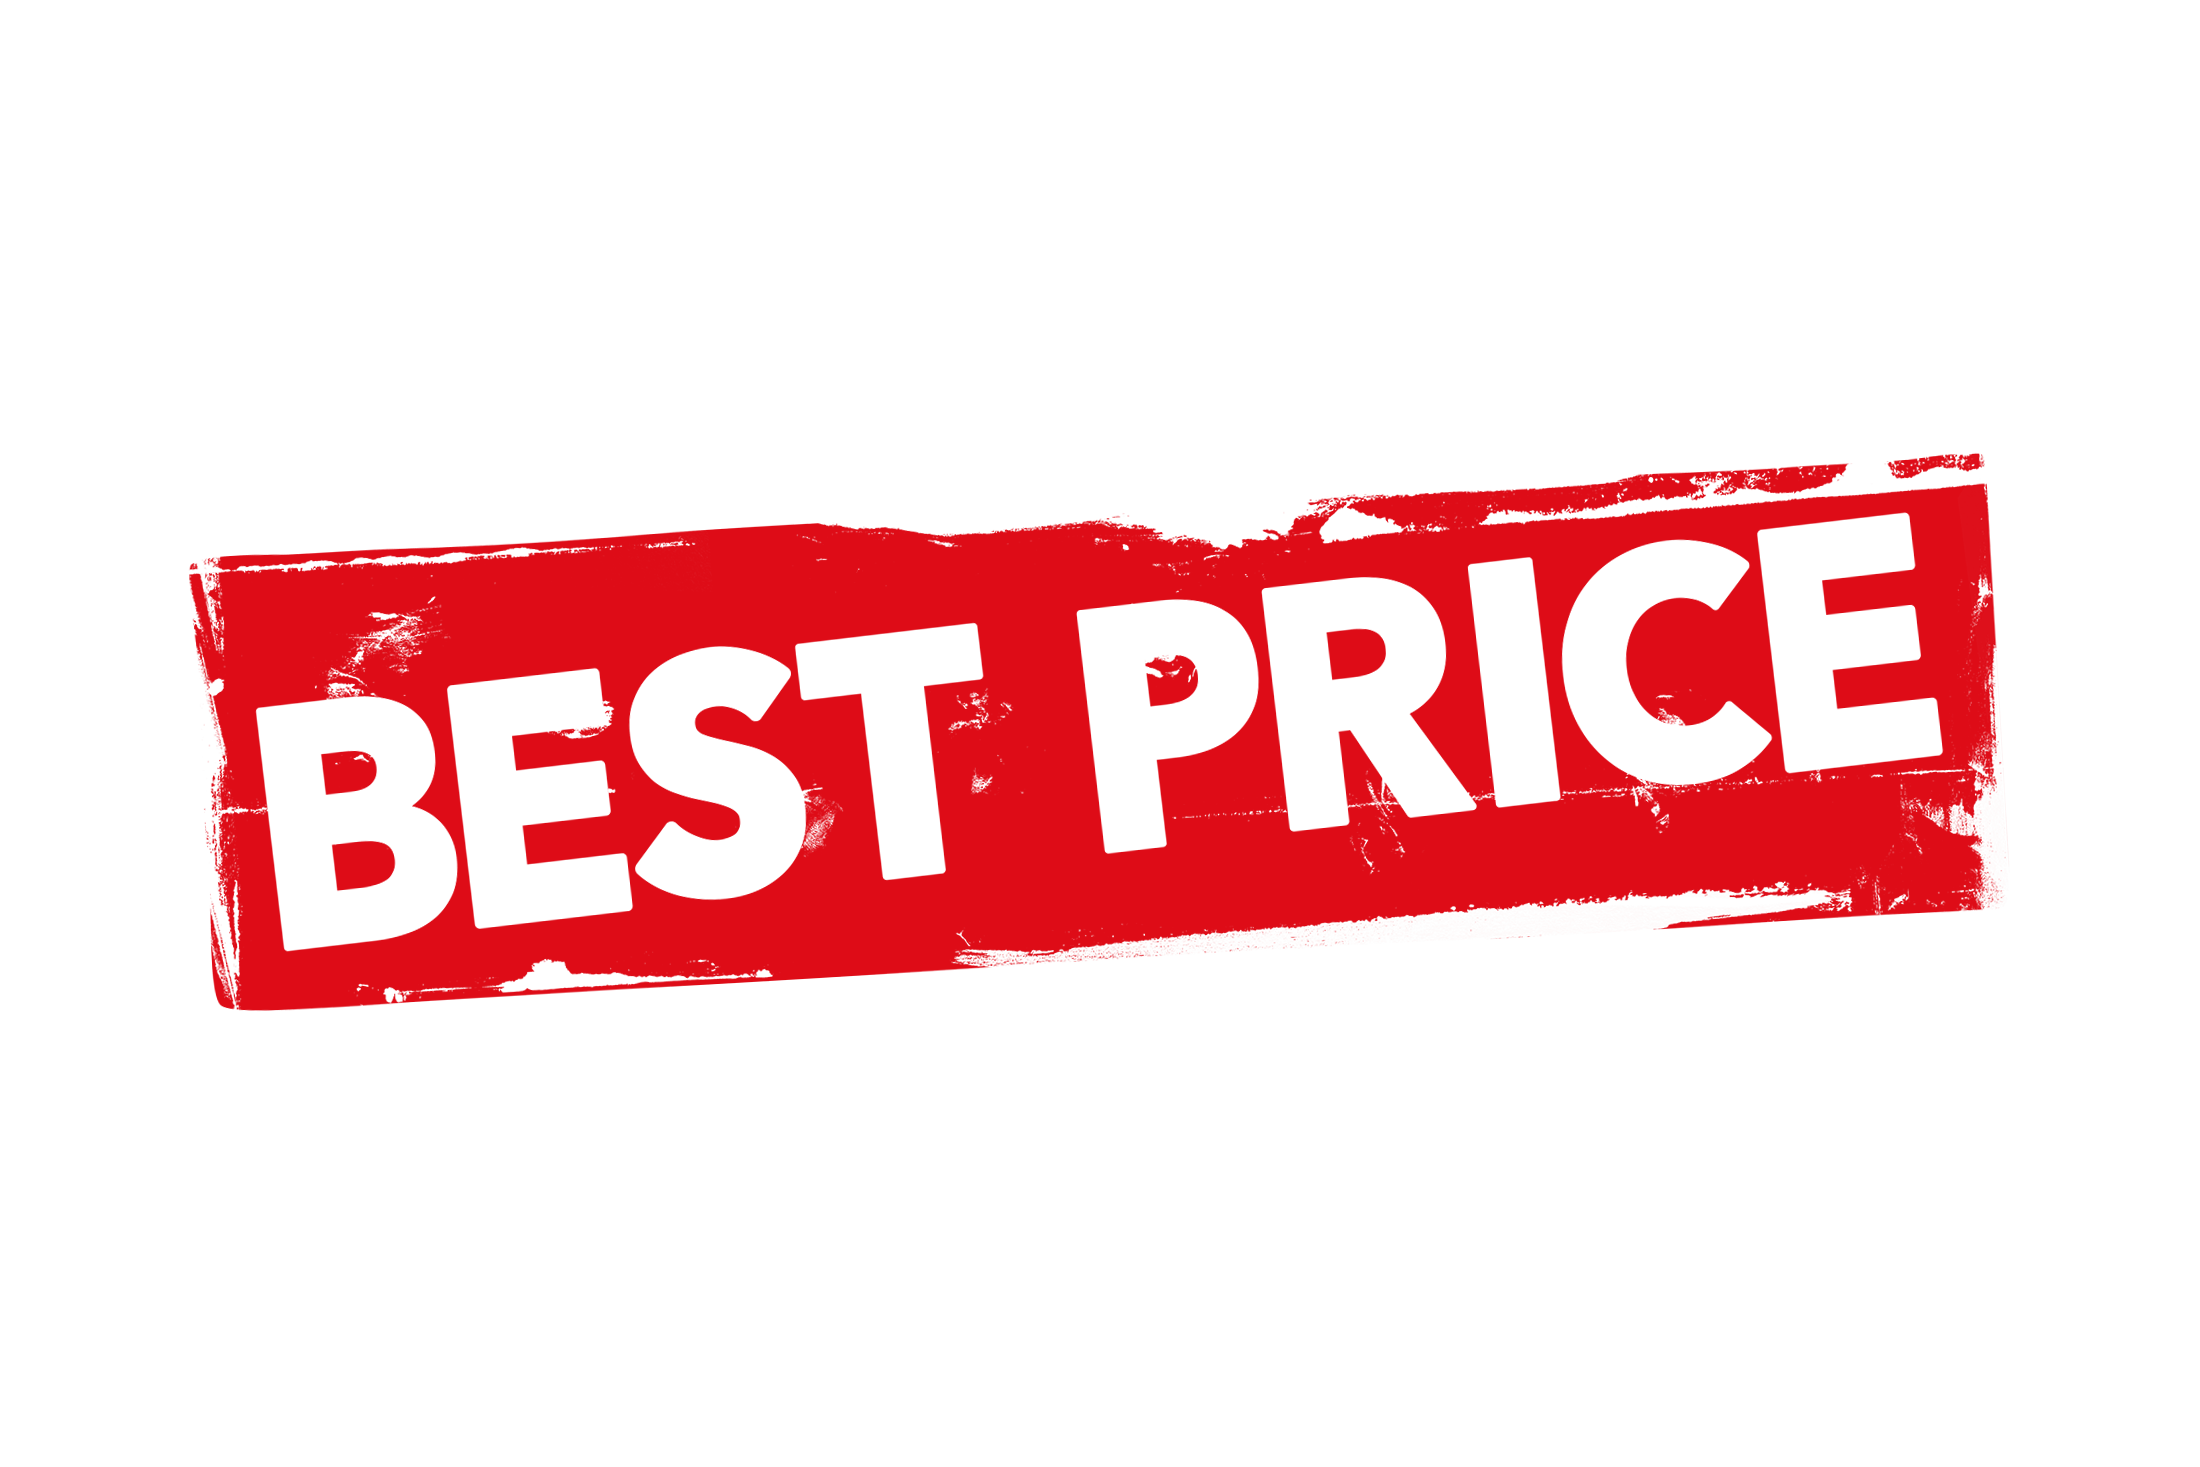 lower price png